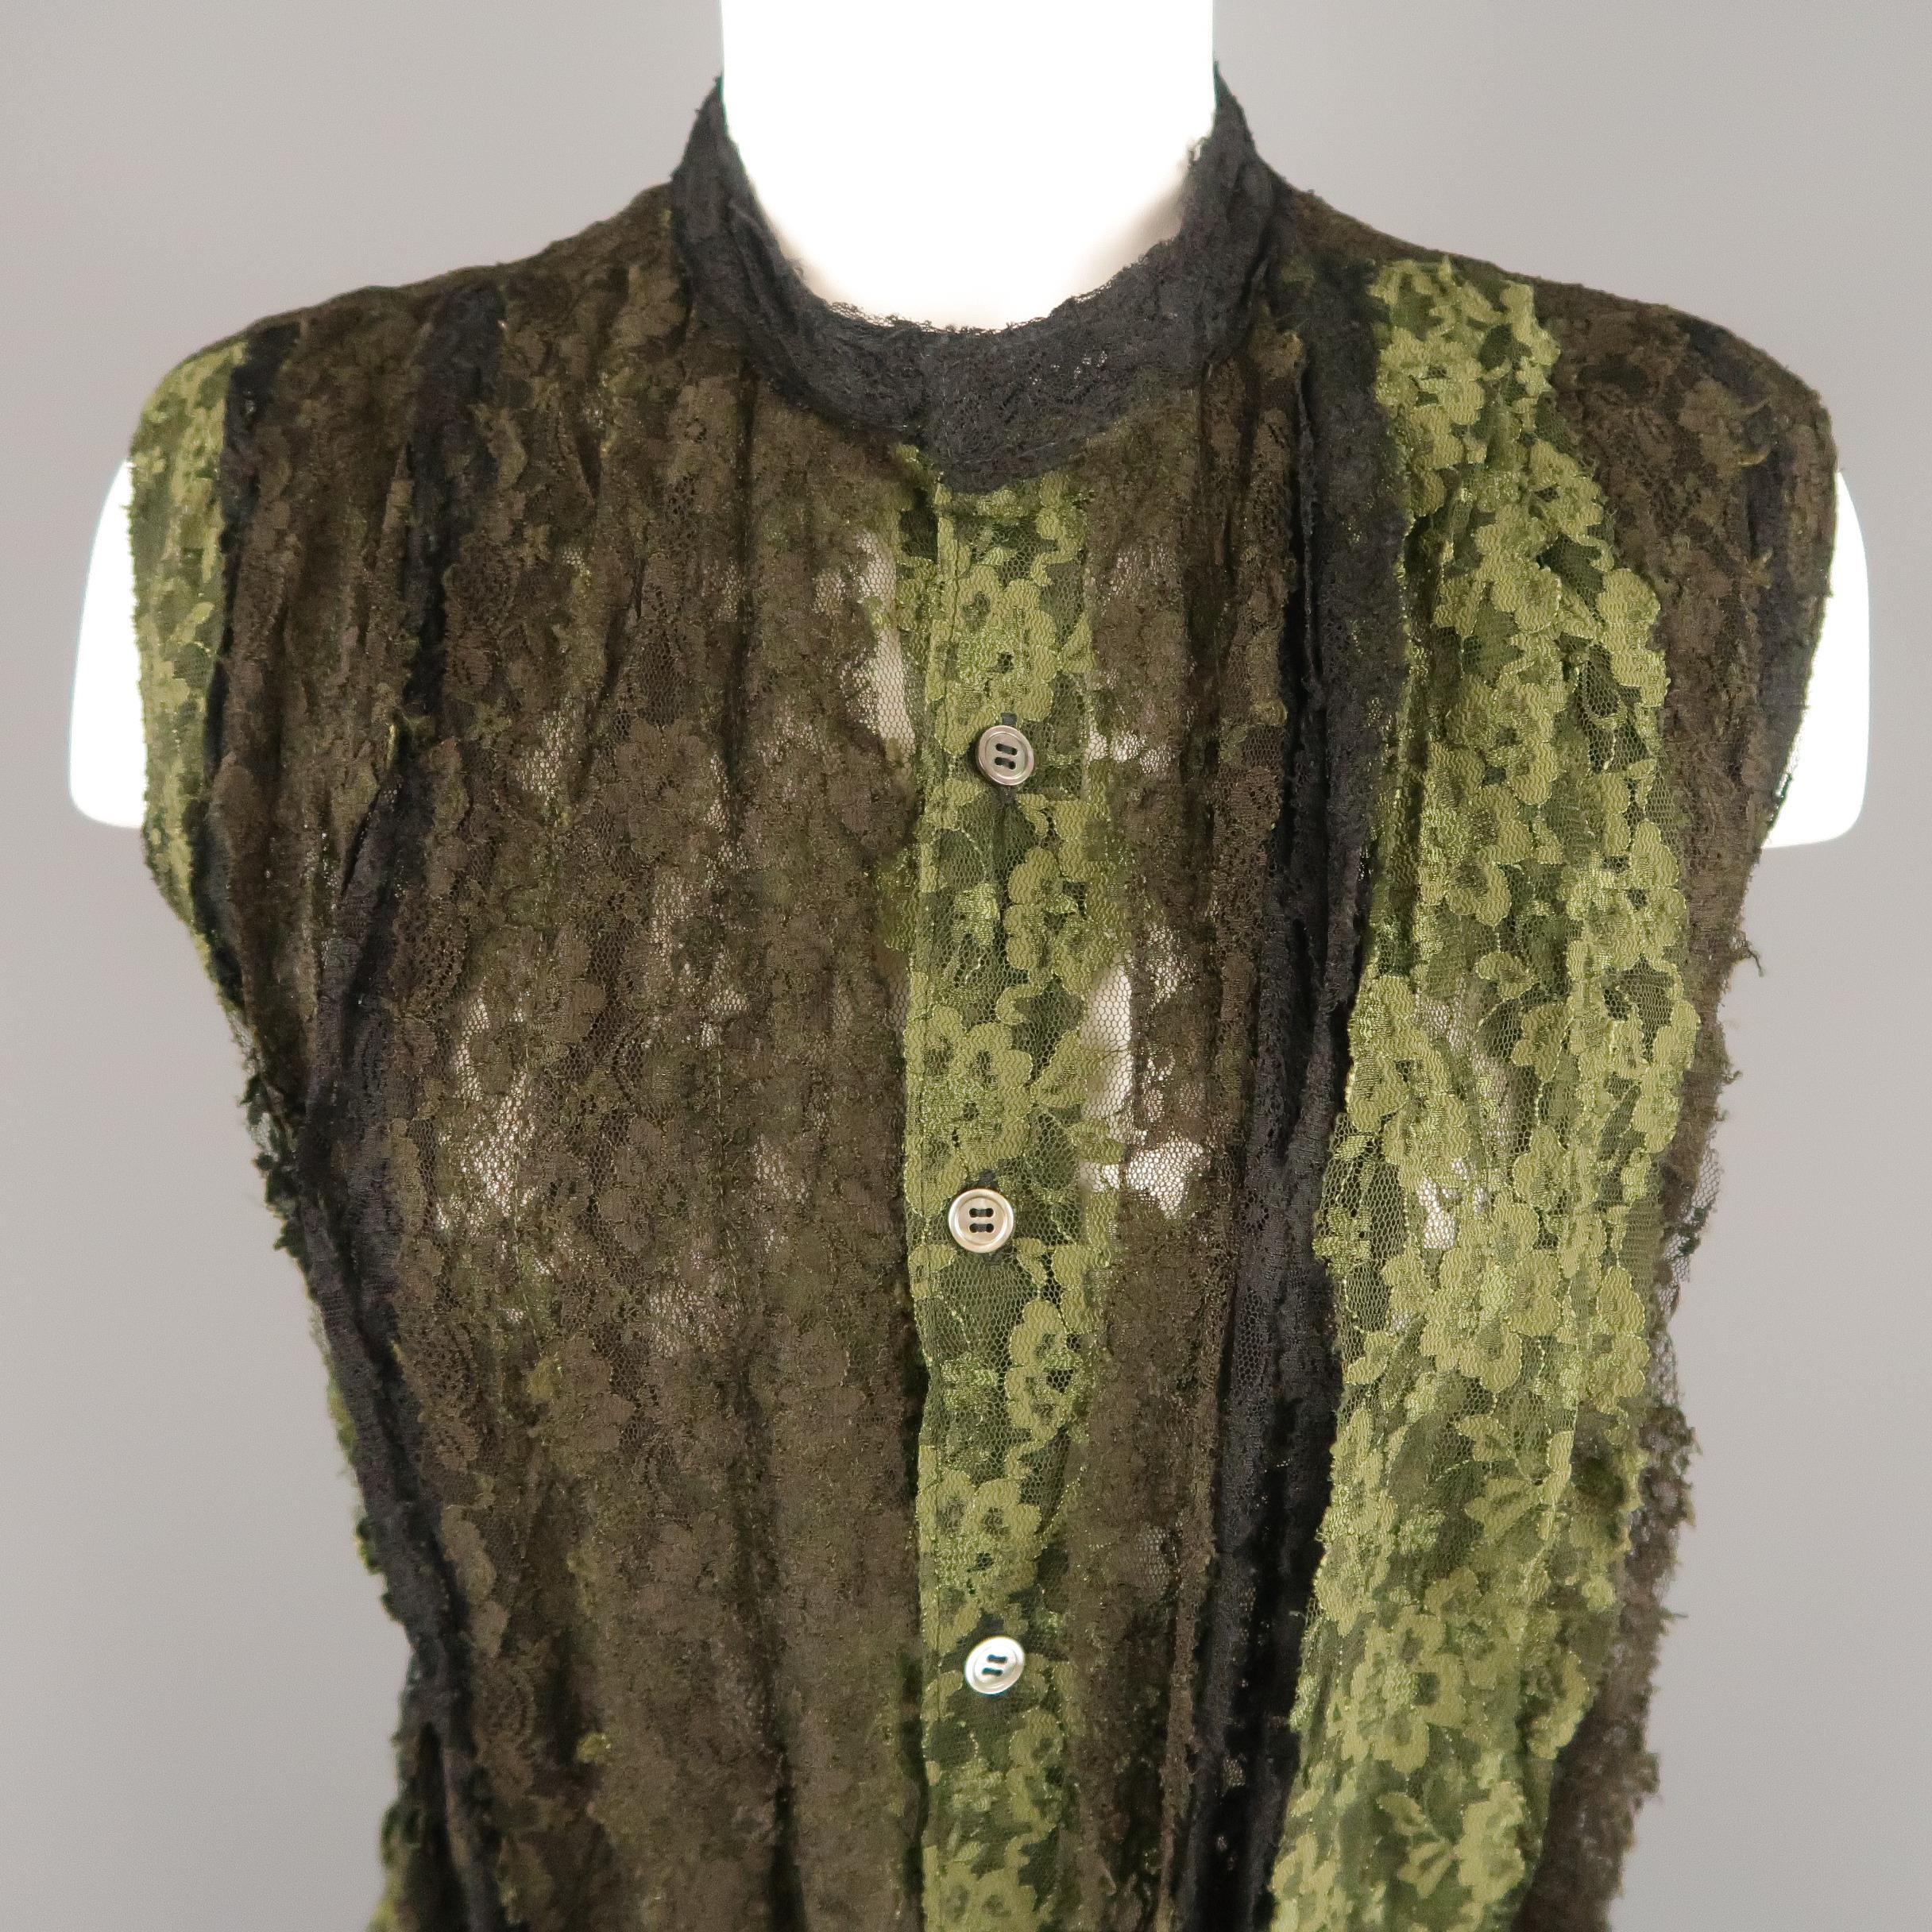 JUNYA WATANABE sleeveless blouse from the iconic Fall Winter 2004 punk collection features panels of black, brown and olive green lace ruffles at the front, a black lace band collar, and deep olive green lace back. Size and care tags removed. As-is.